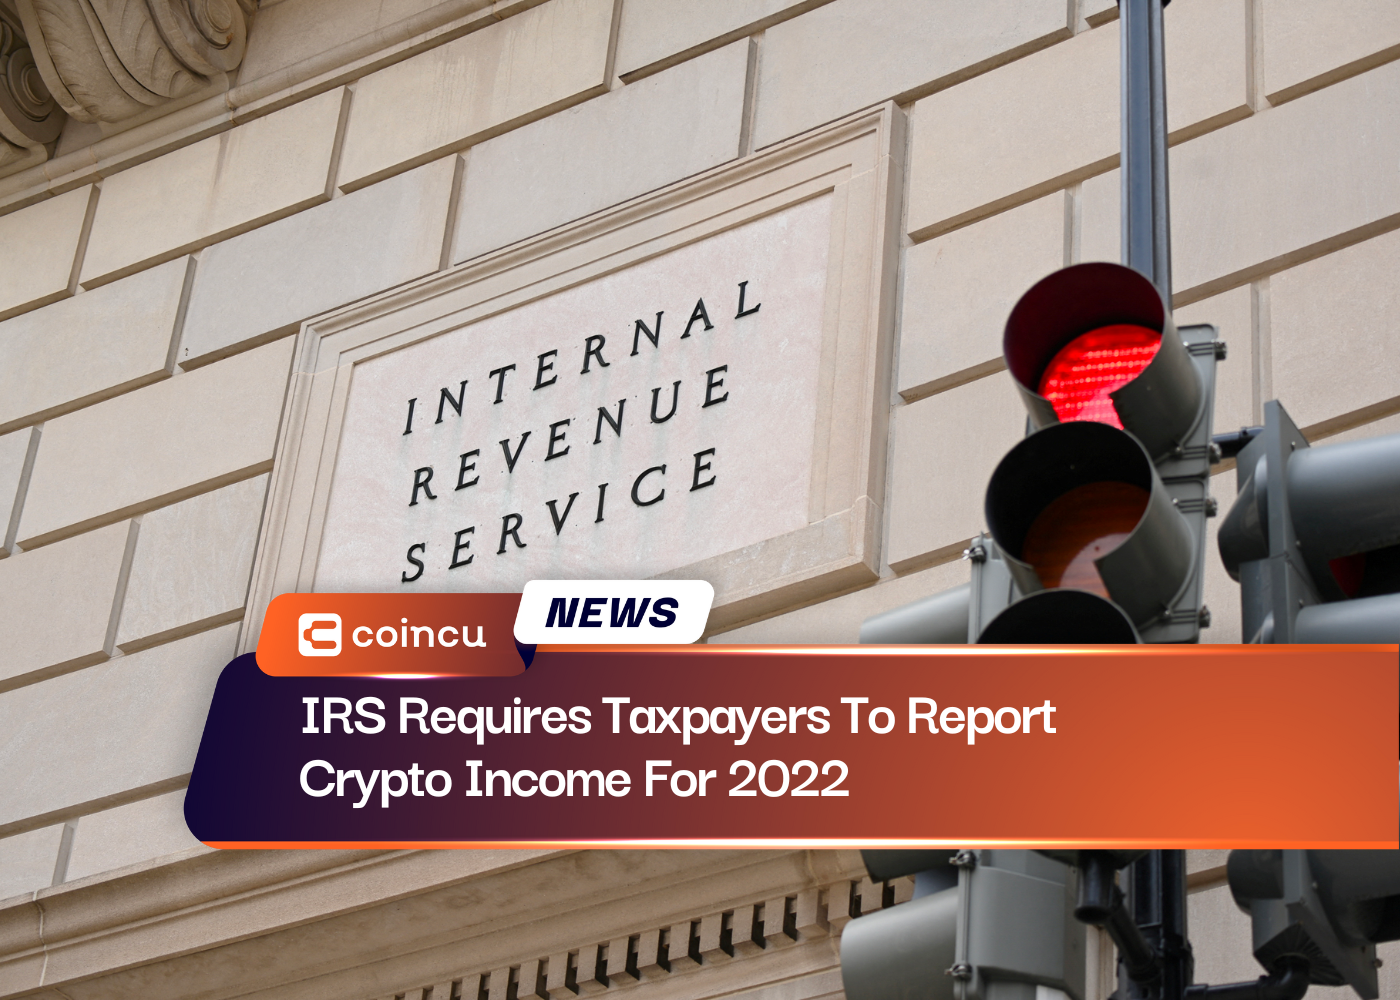 IRS Requires Taxpayers To Report Crypto Income For 2022